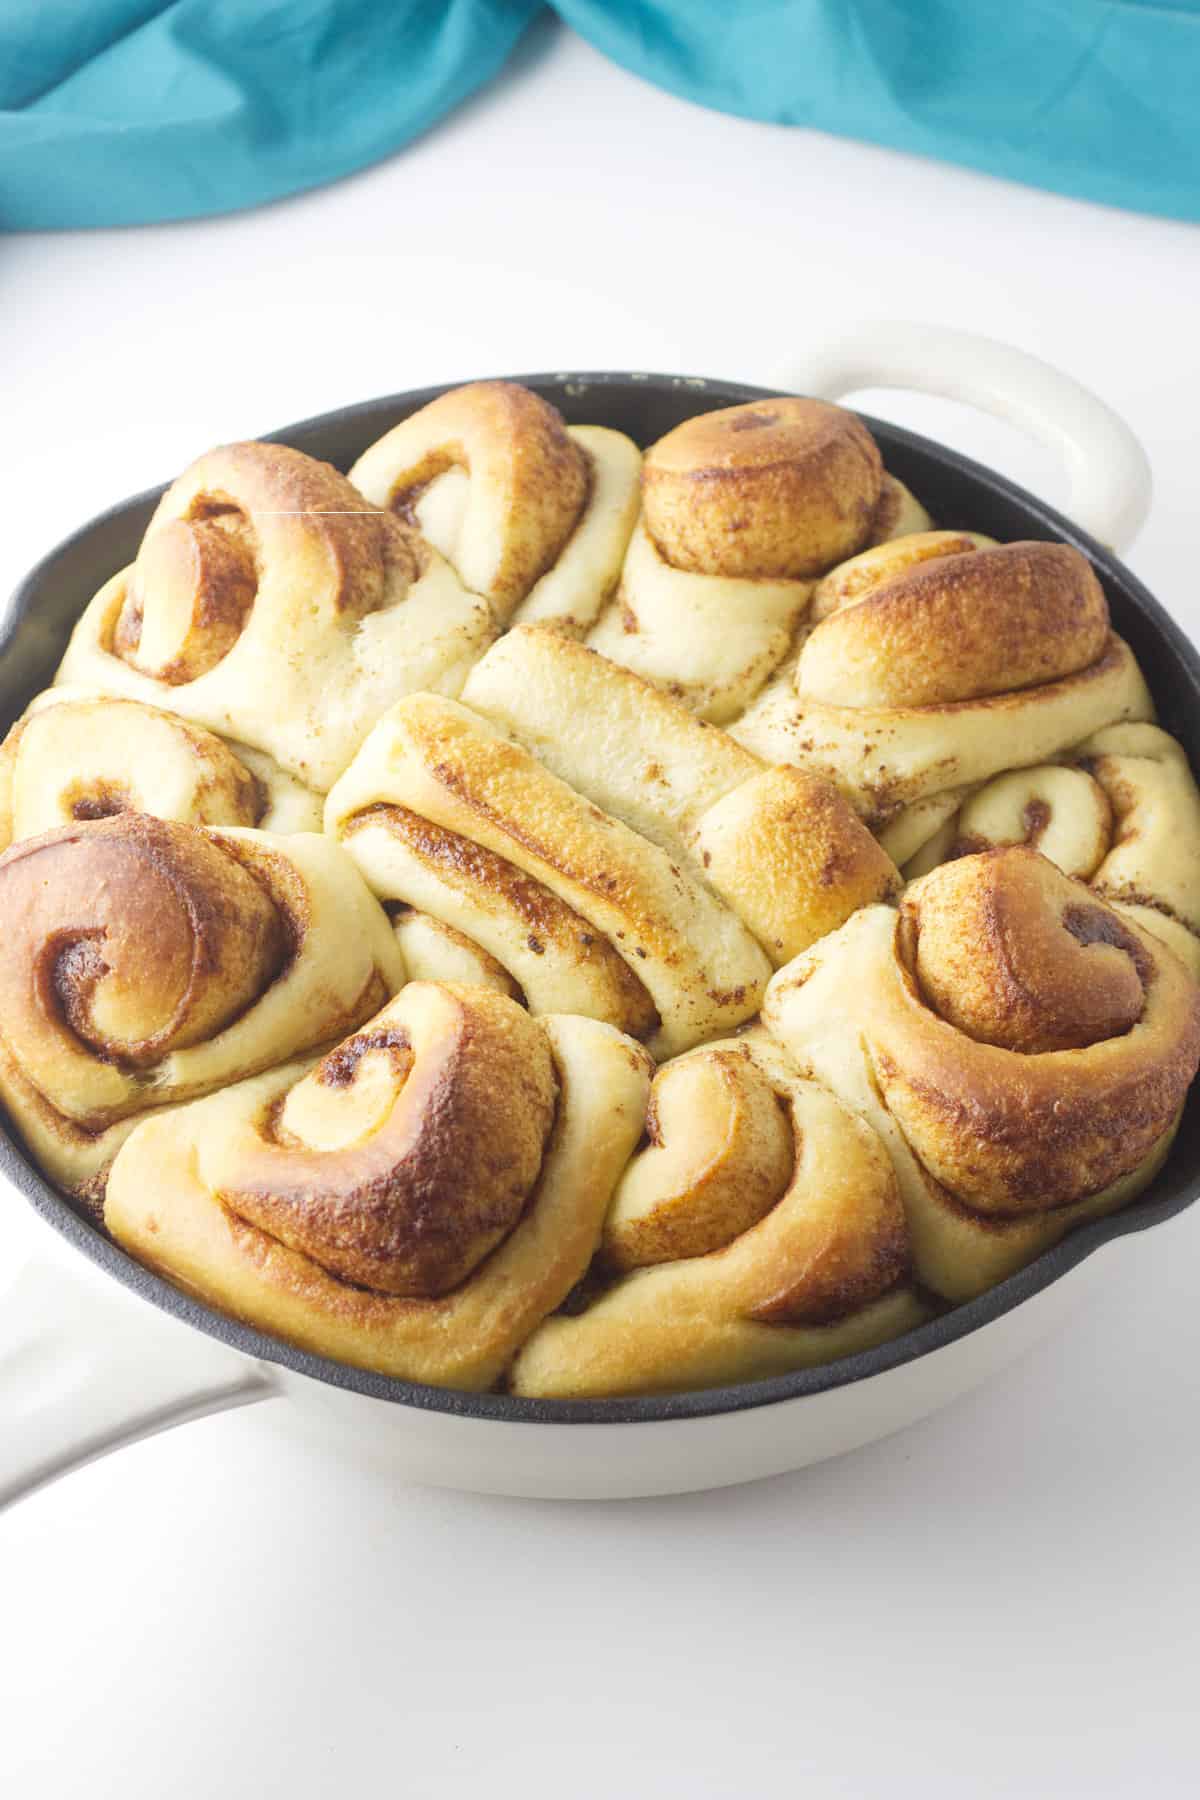 unfrosted cinnamon rolls fresh out of the oven.